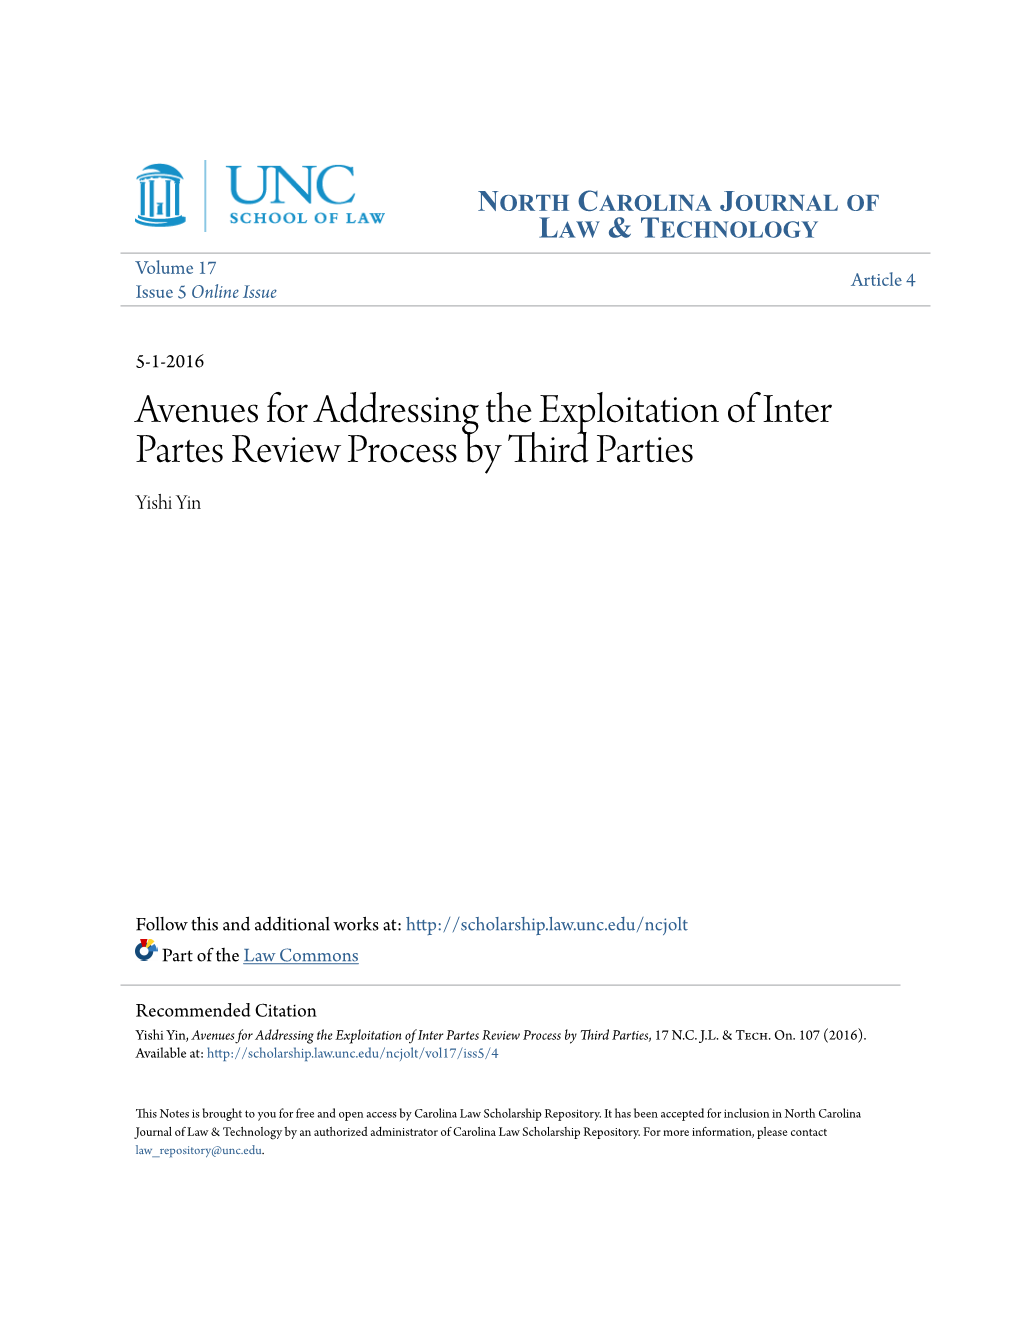 Avenues for Addressing the Exploitation of Inter Partes Review Process by Third Parties Yishi Yin